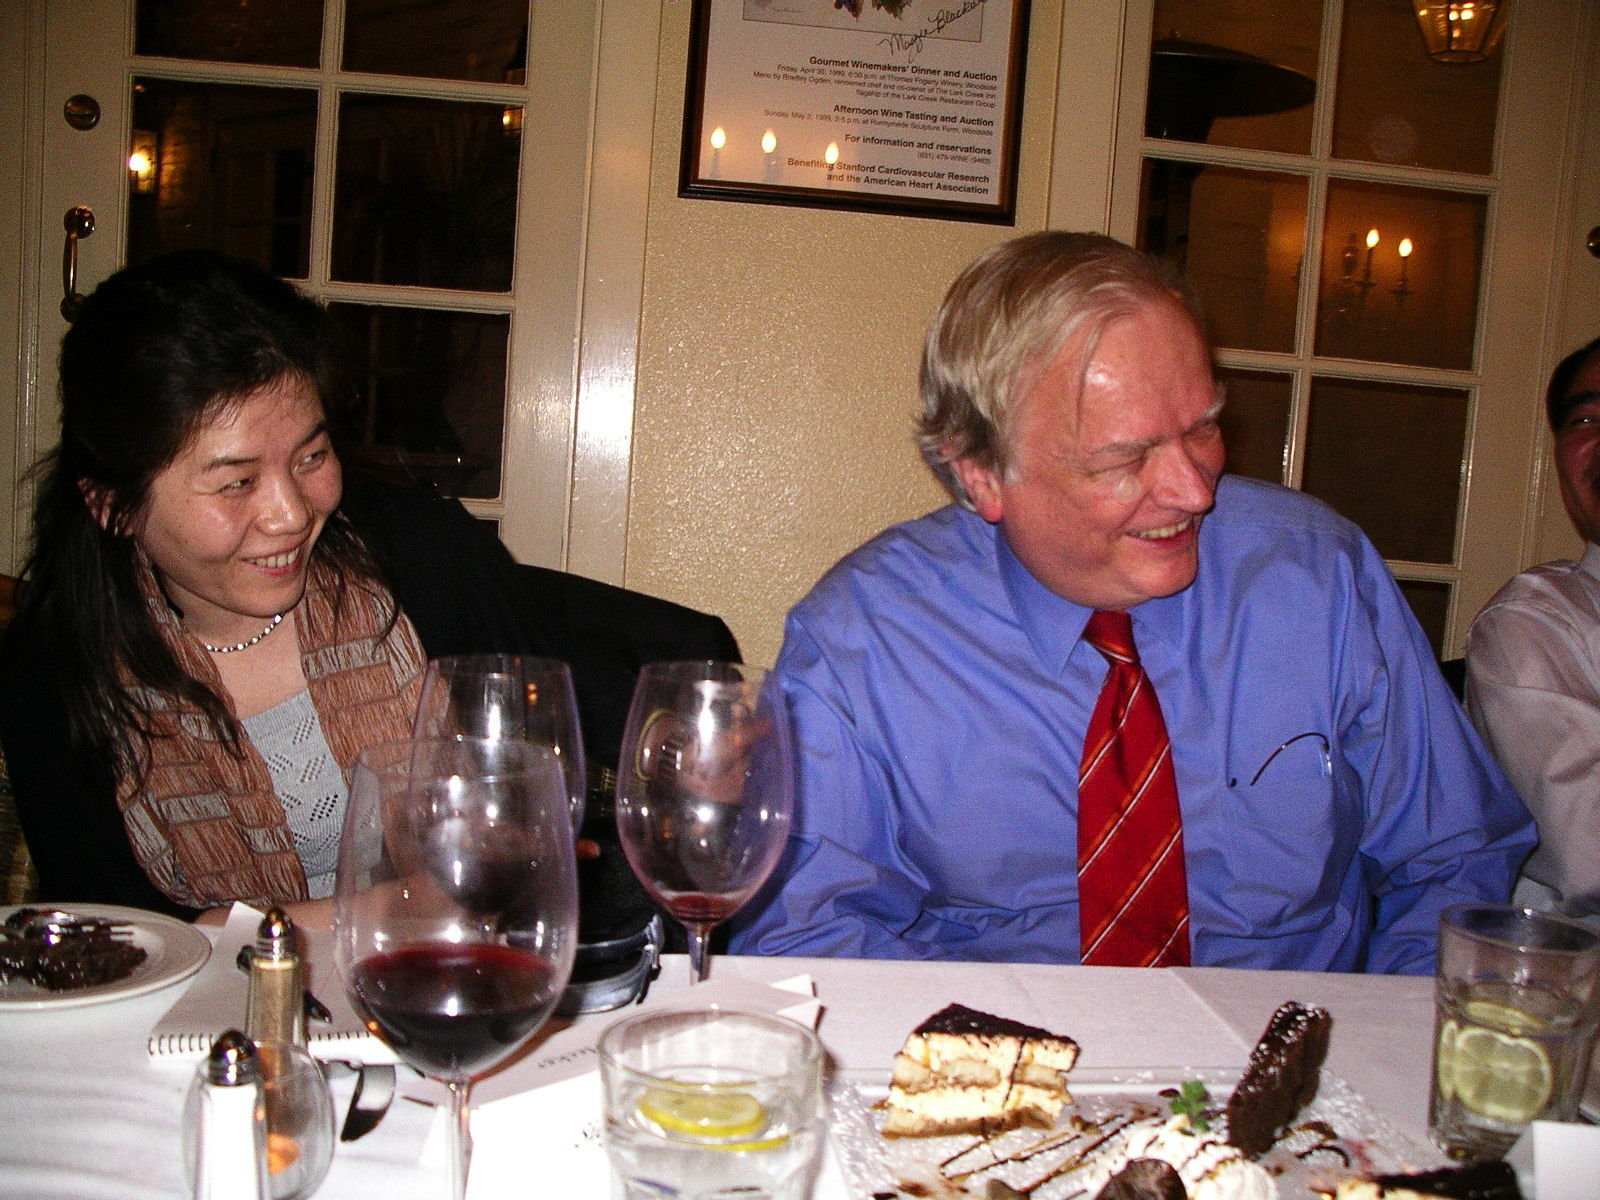 Man in blue dress shirt and woman with scarf over her neck laughing heartily sitting at the restaurant table